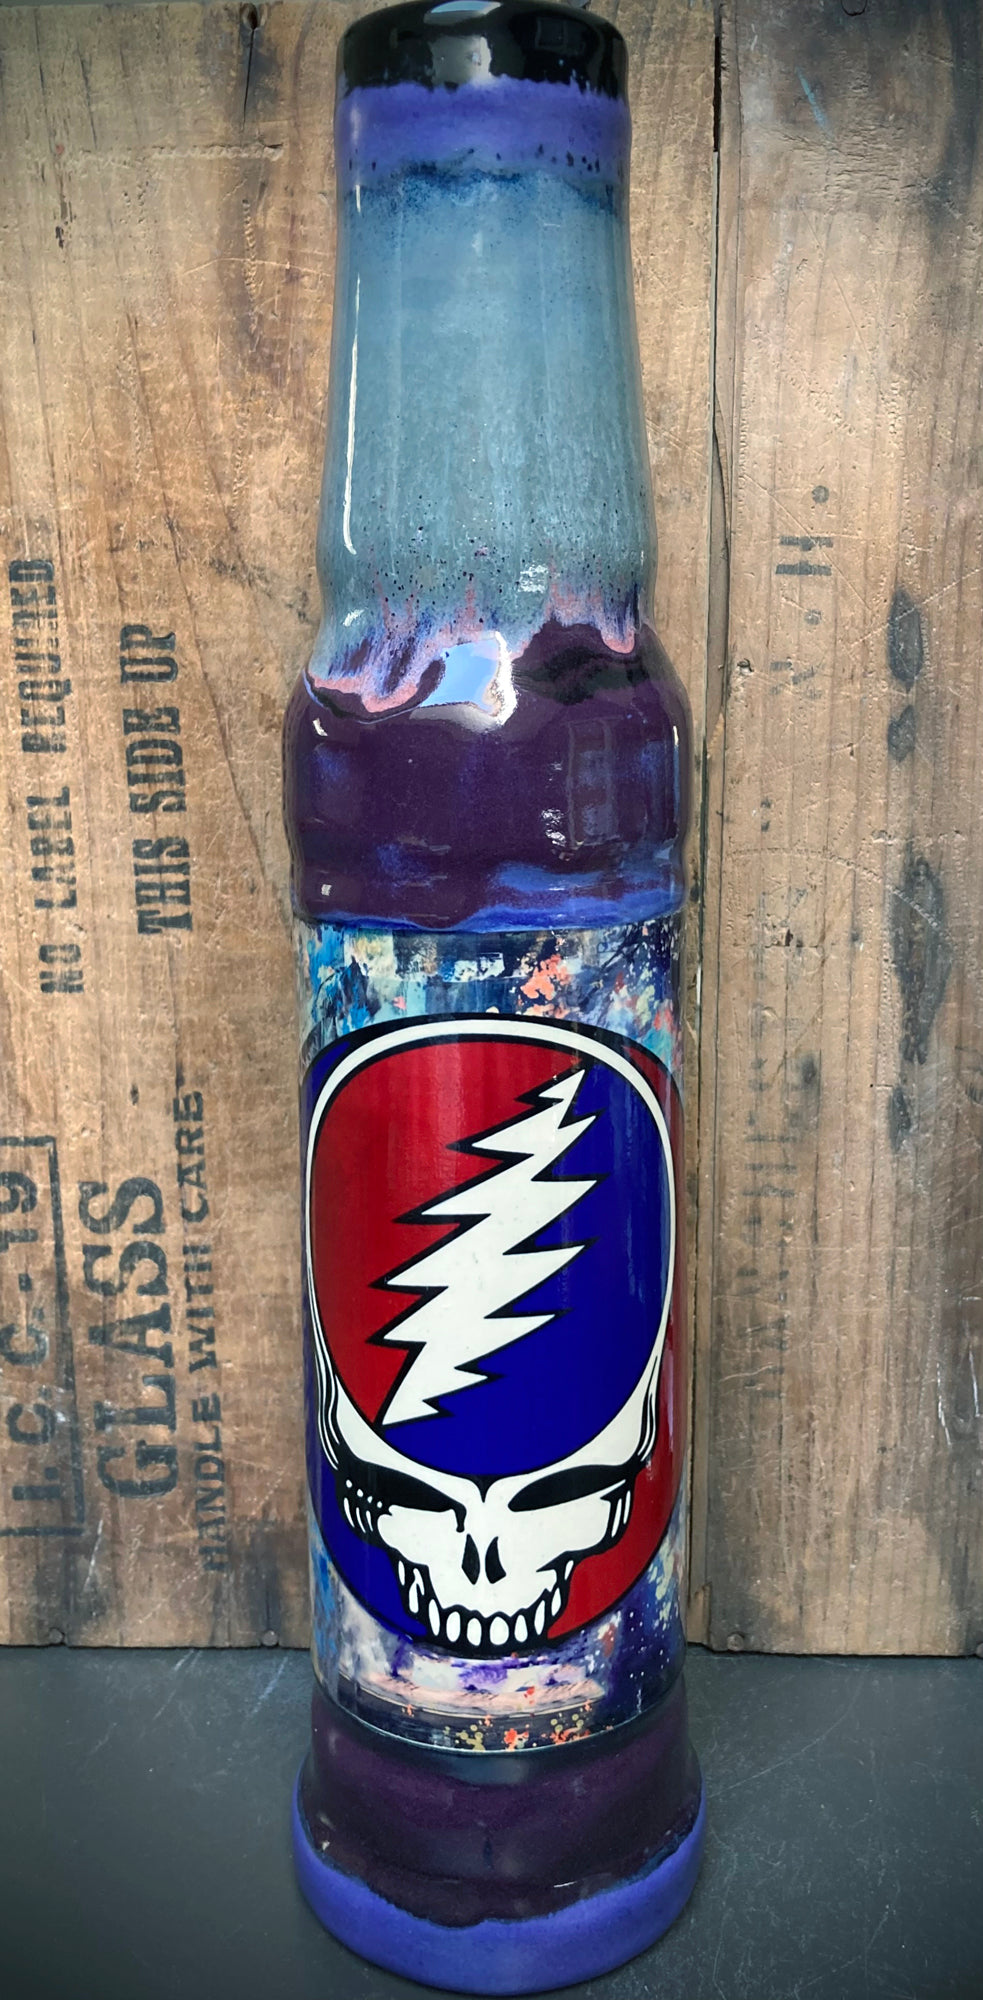 Ceramic Bong - "Steal Your Face"